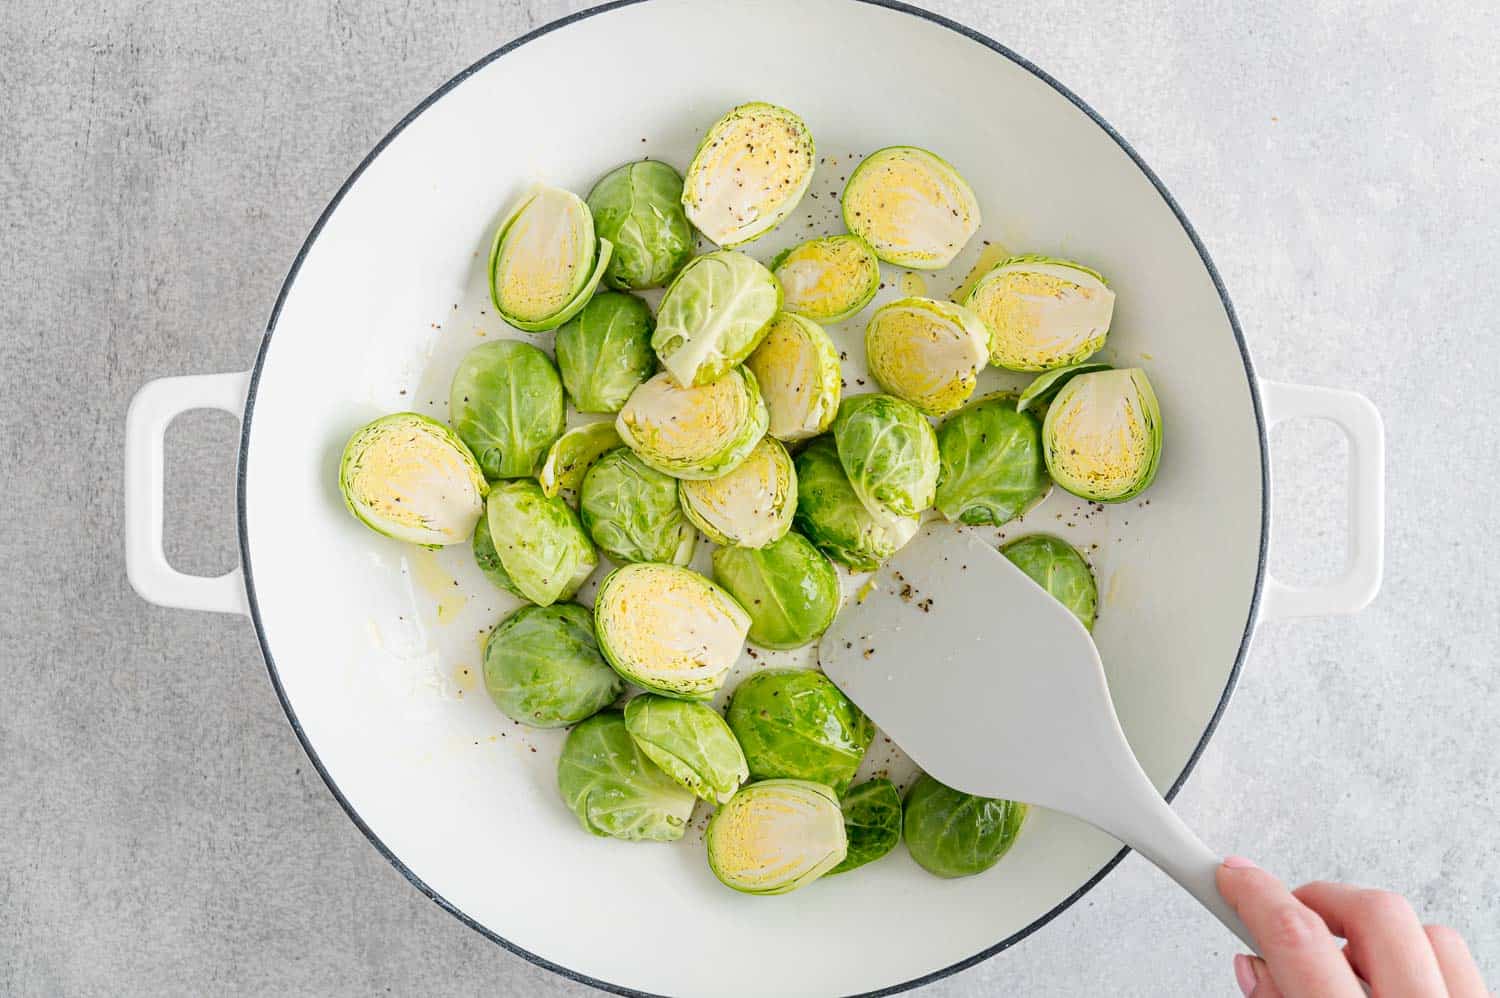 Brussels sprouts being cooked in a white frying pan.